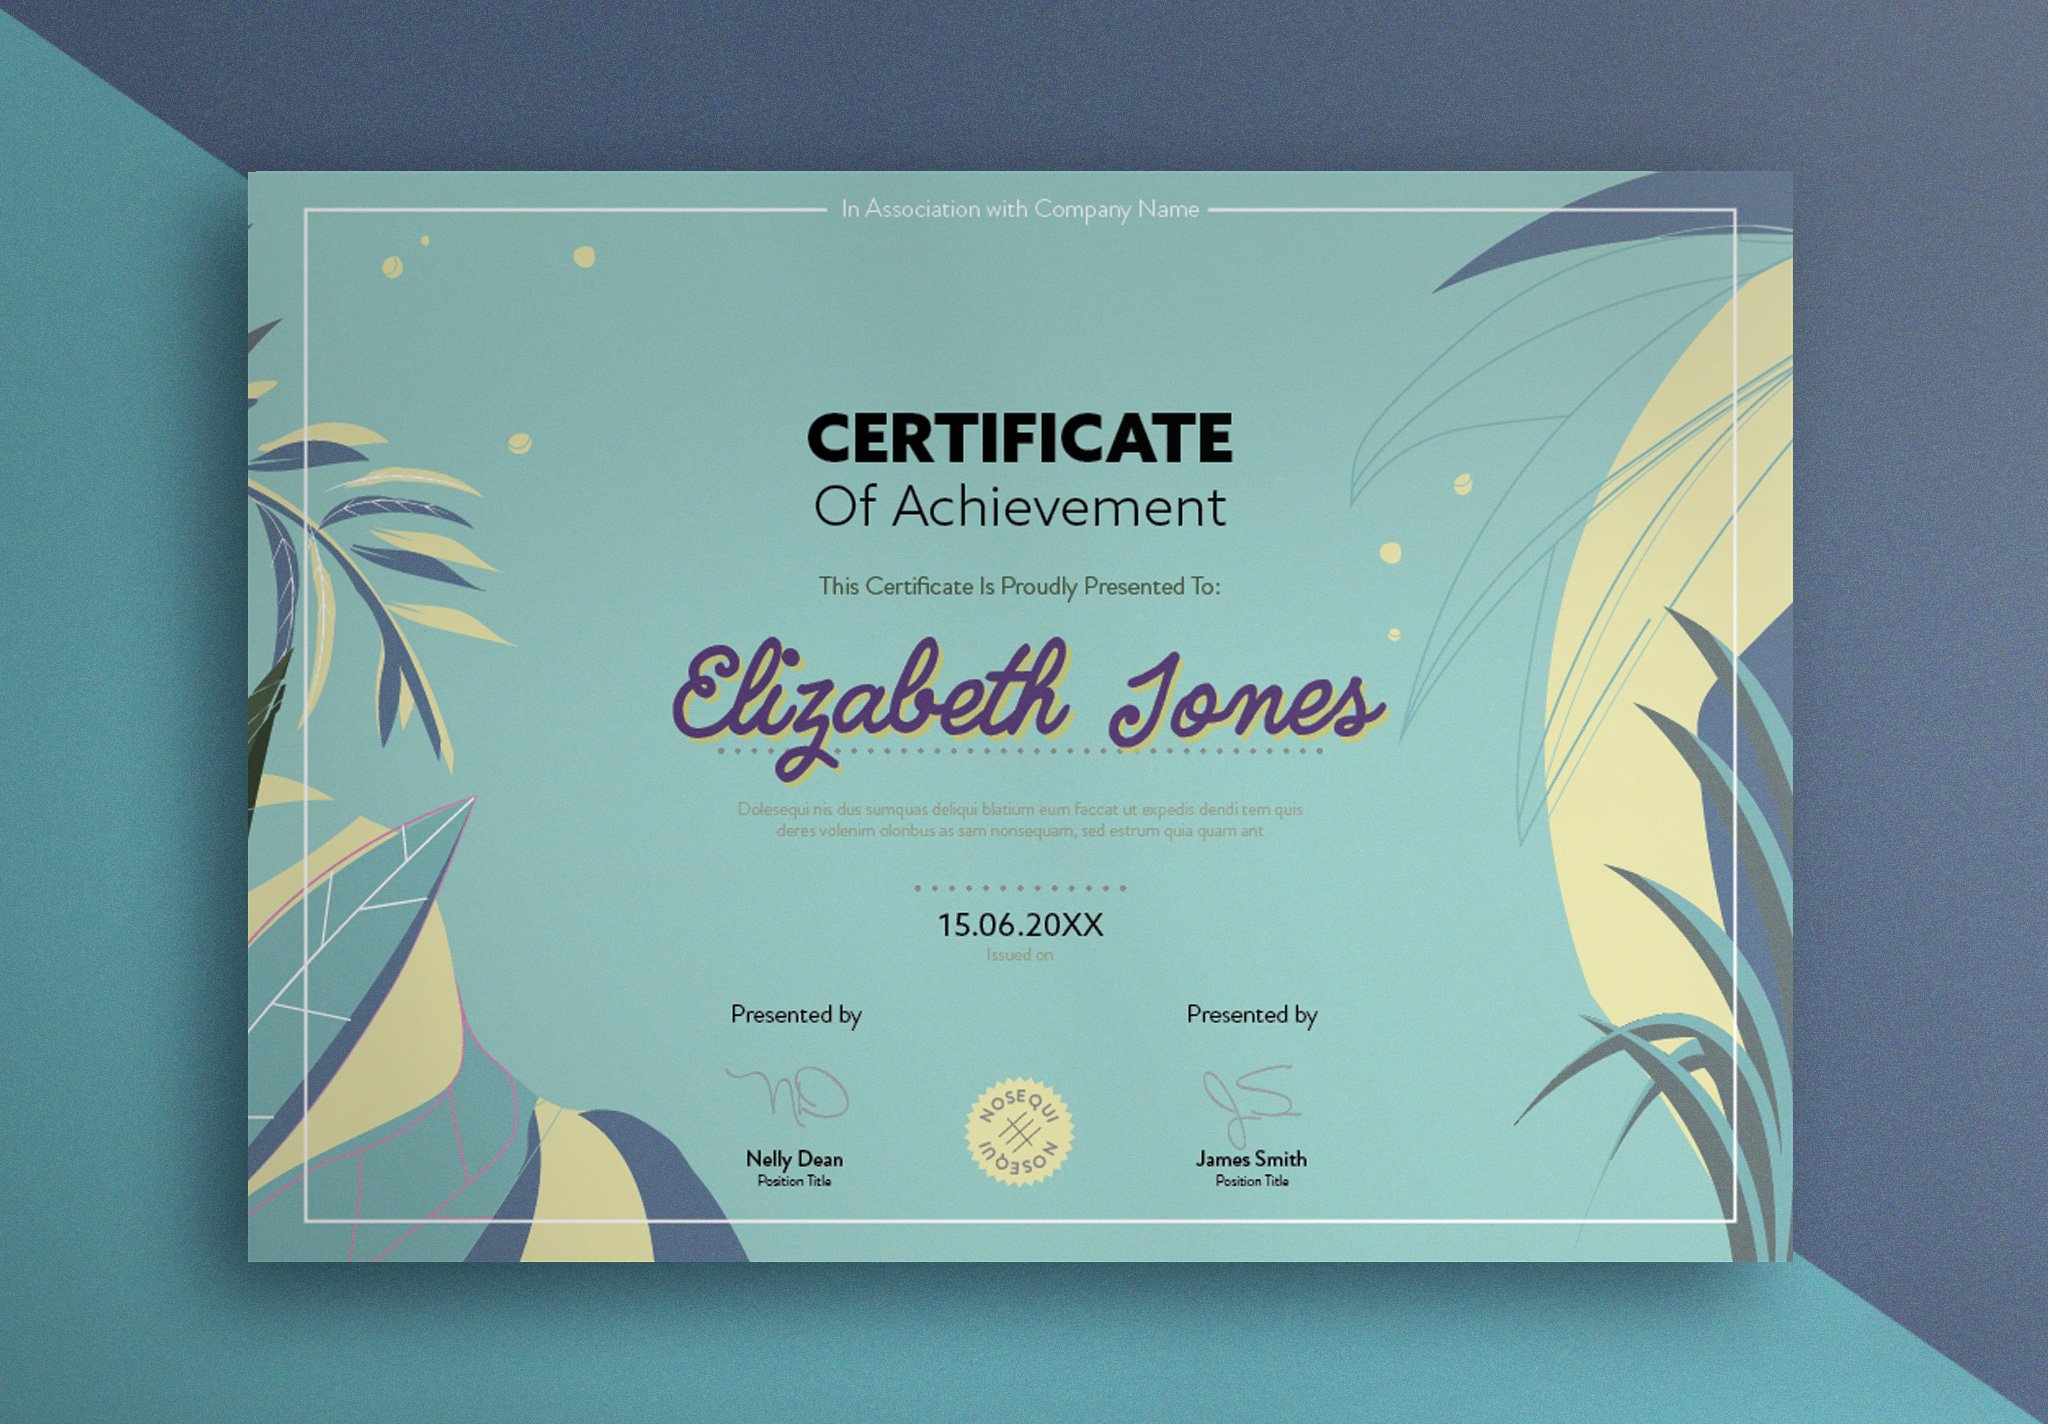 Certificate with Leaf Illustration cover image.